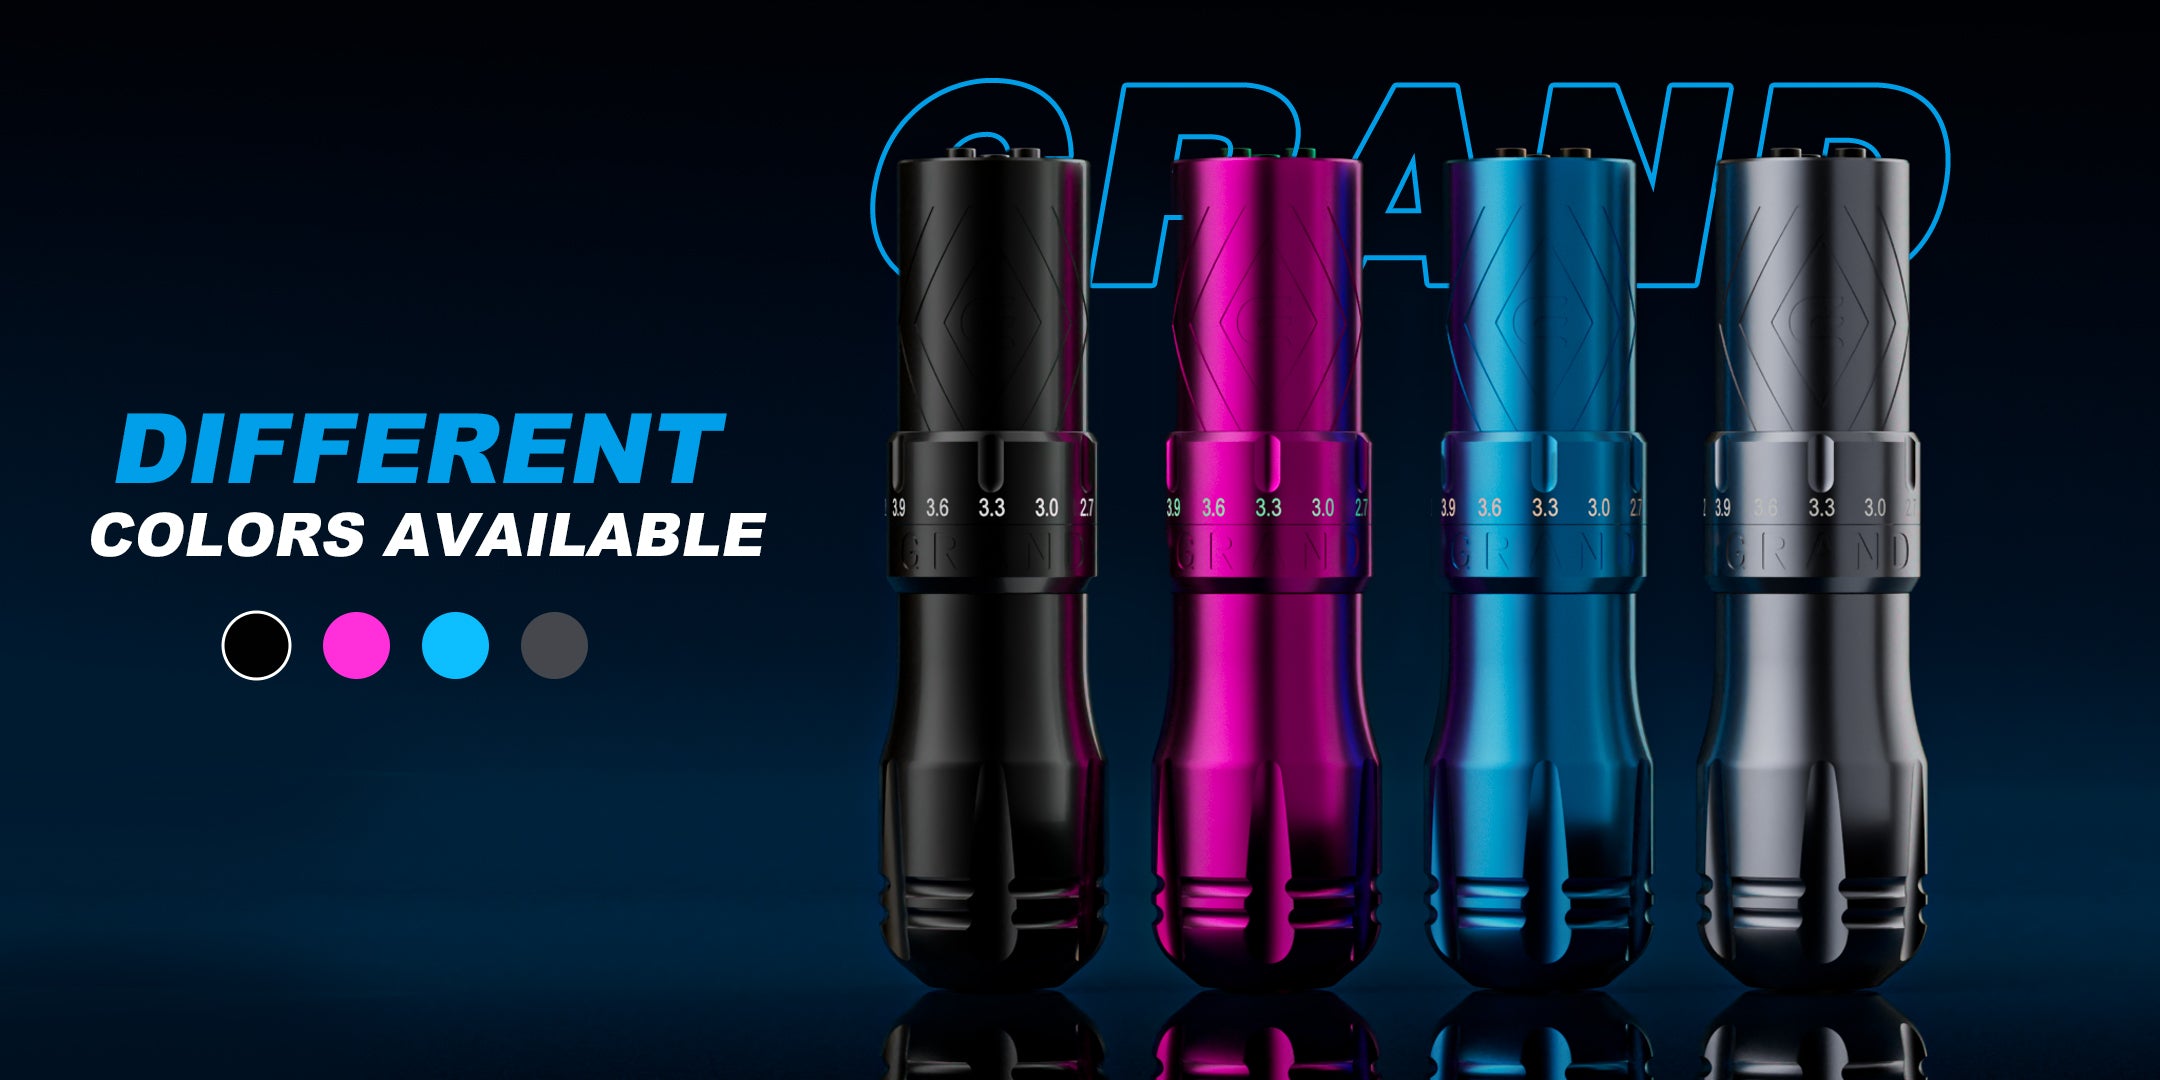 Four different colors available in EMALLA GRAND Wireless Tattoo Pen Machine